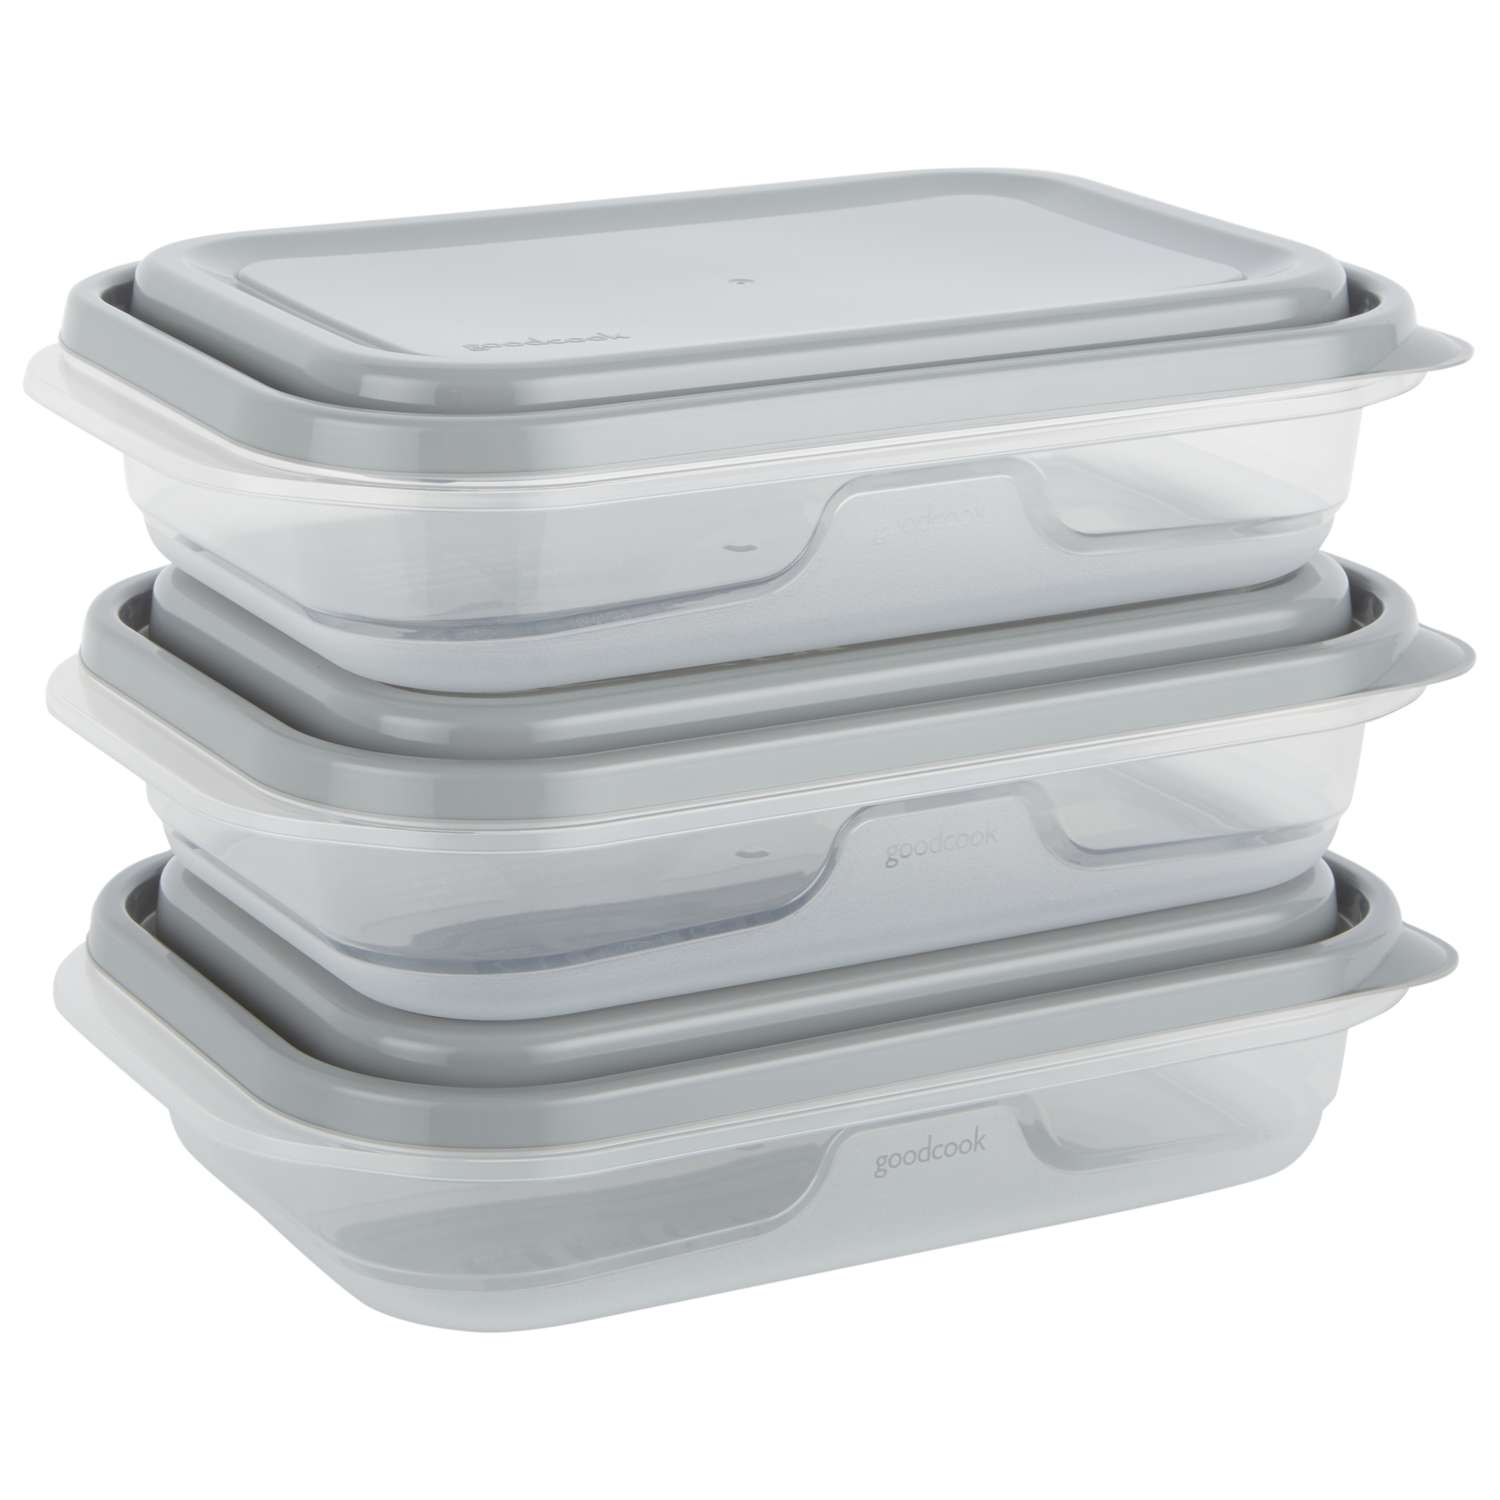 Save on Goodcook Meal Prep Containers + Lids Order Online Delivery